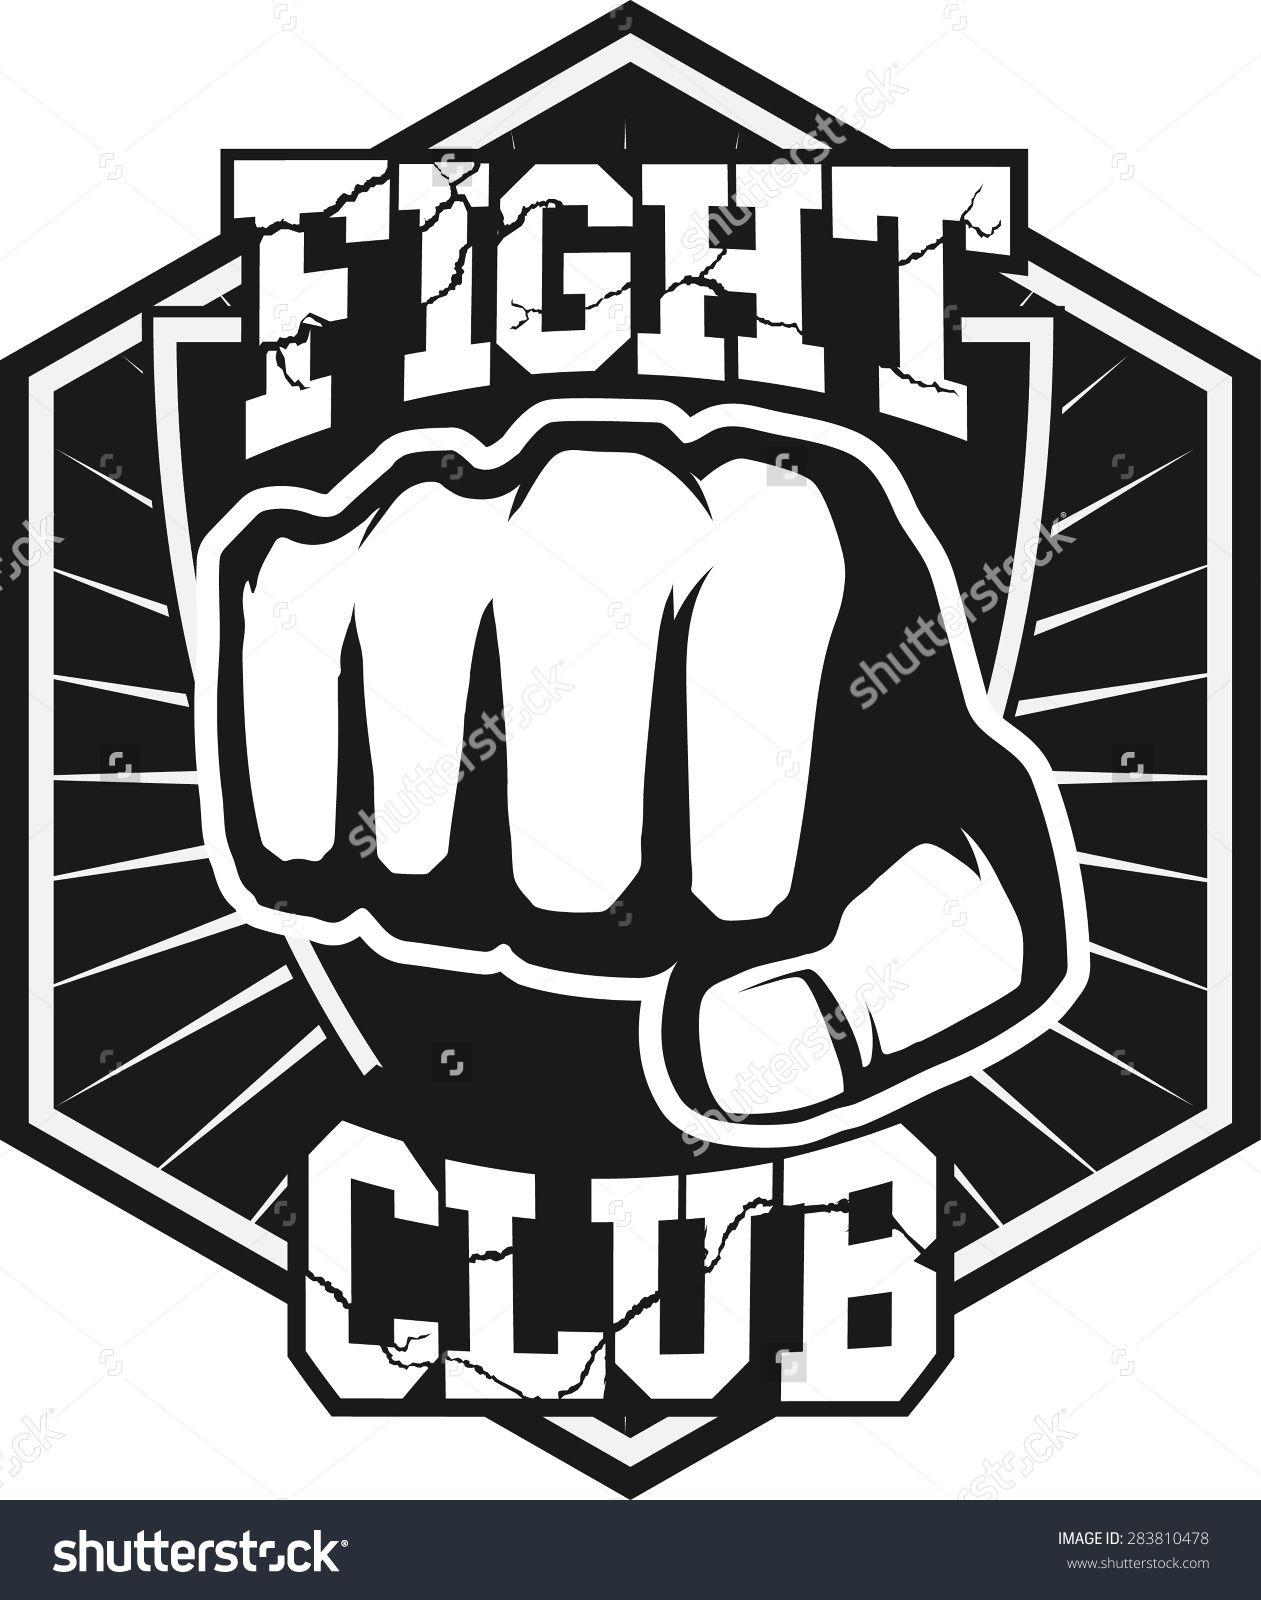 MMA Logo - Fight club MMA UFC Mixed martial arts fighting logo stamp